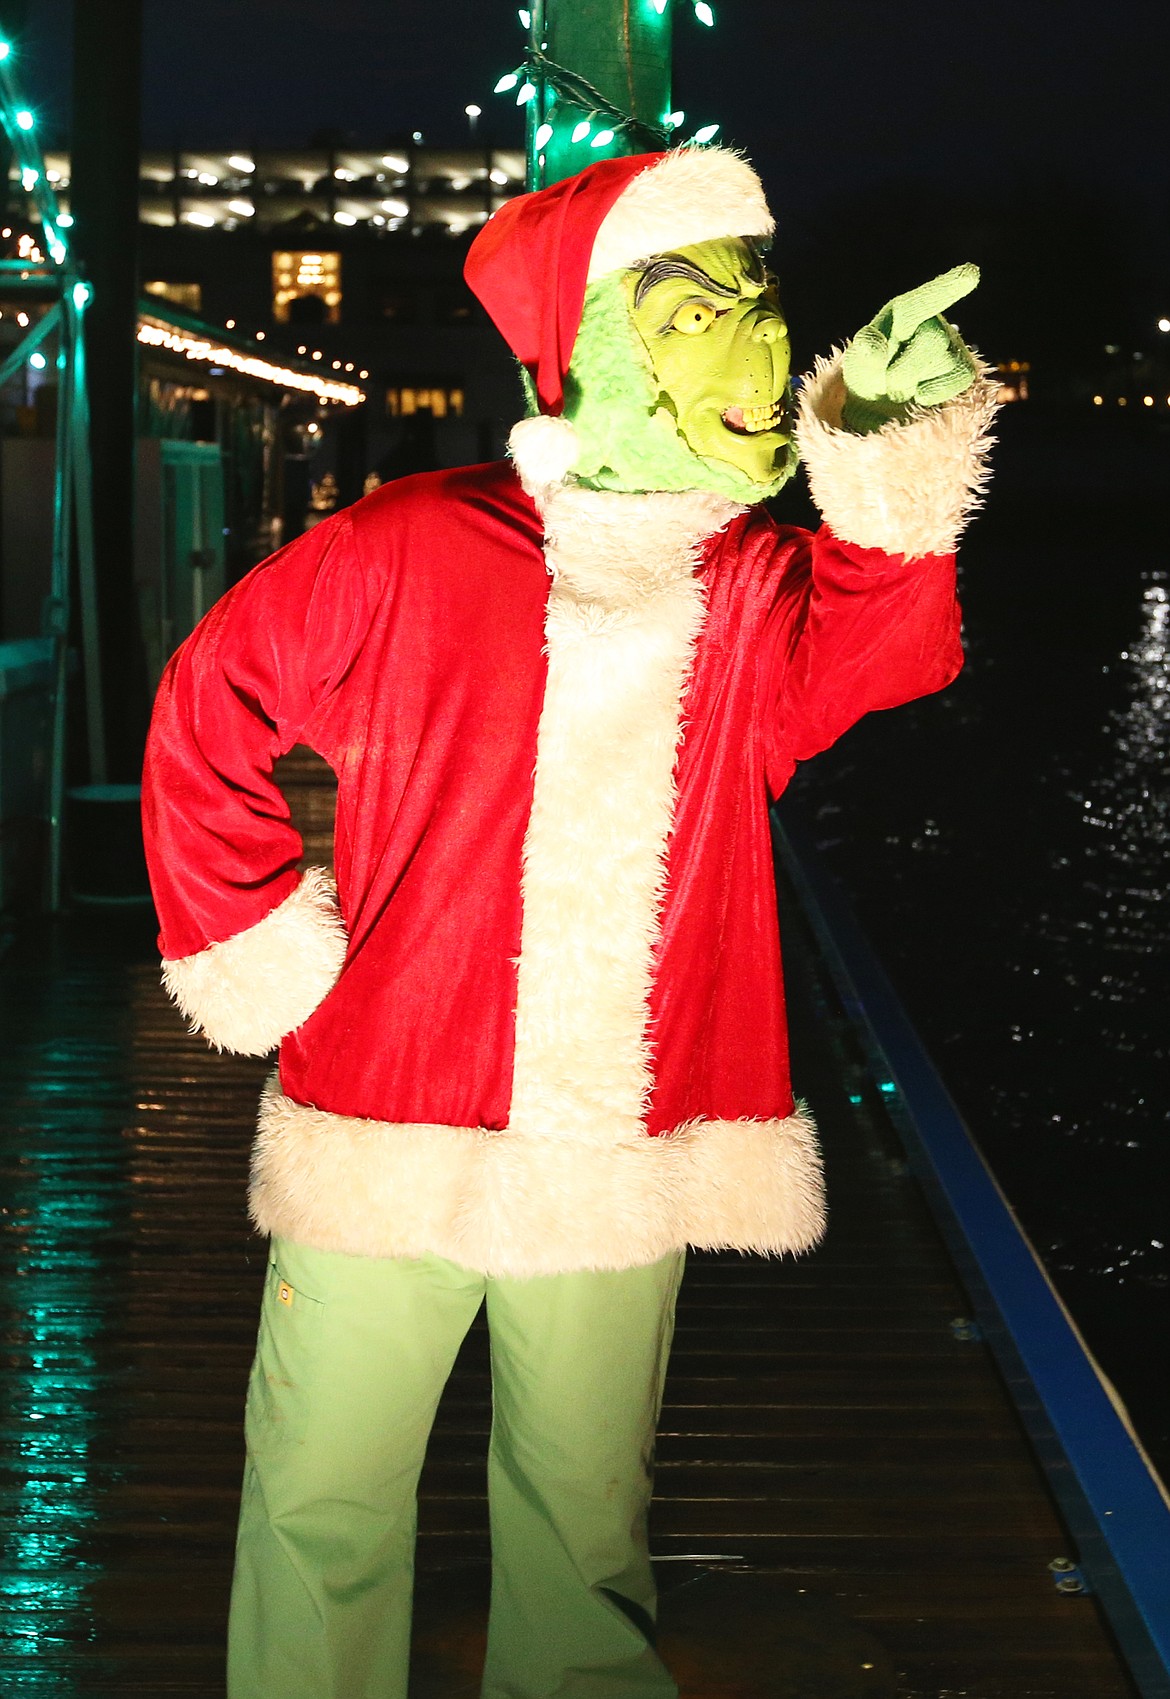 The Grinch points toward children on a Lake Coeur d'Alene Cruises boat as it departs from The Boardwalk at The Coeur d'Alene Resort.